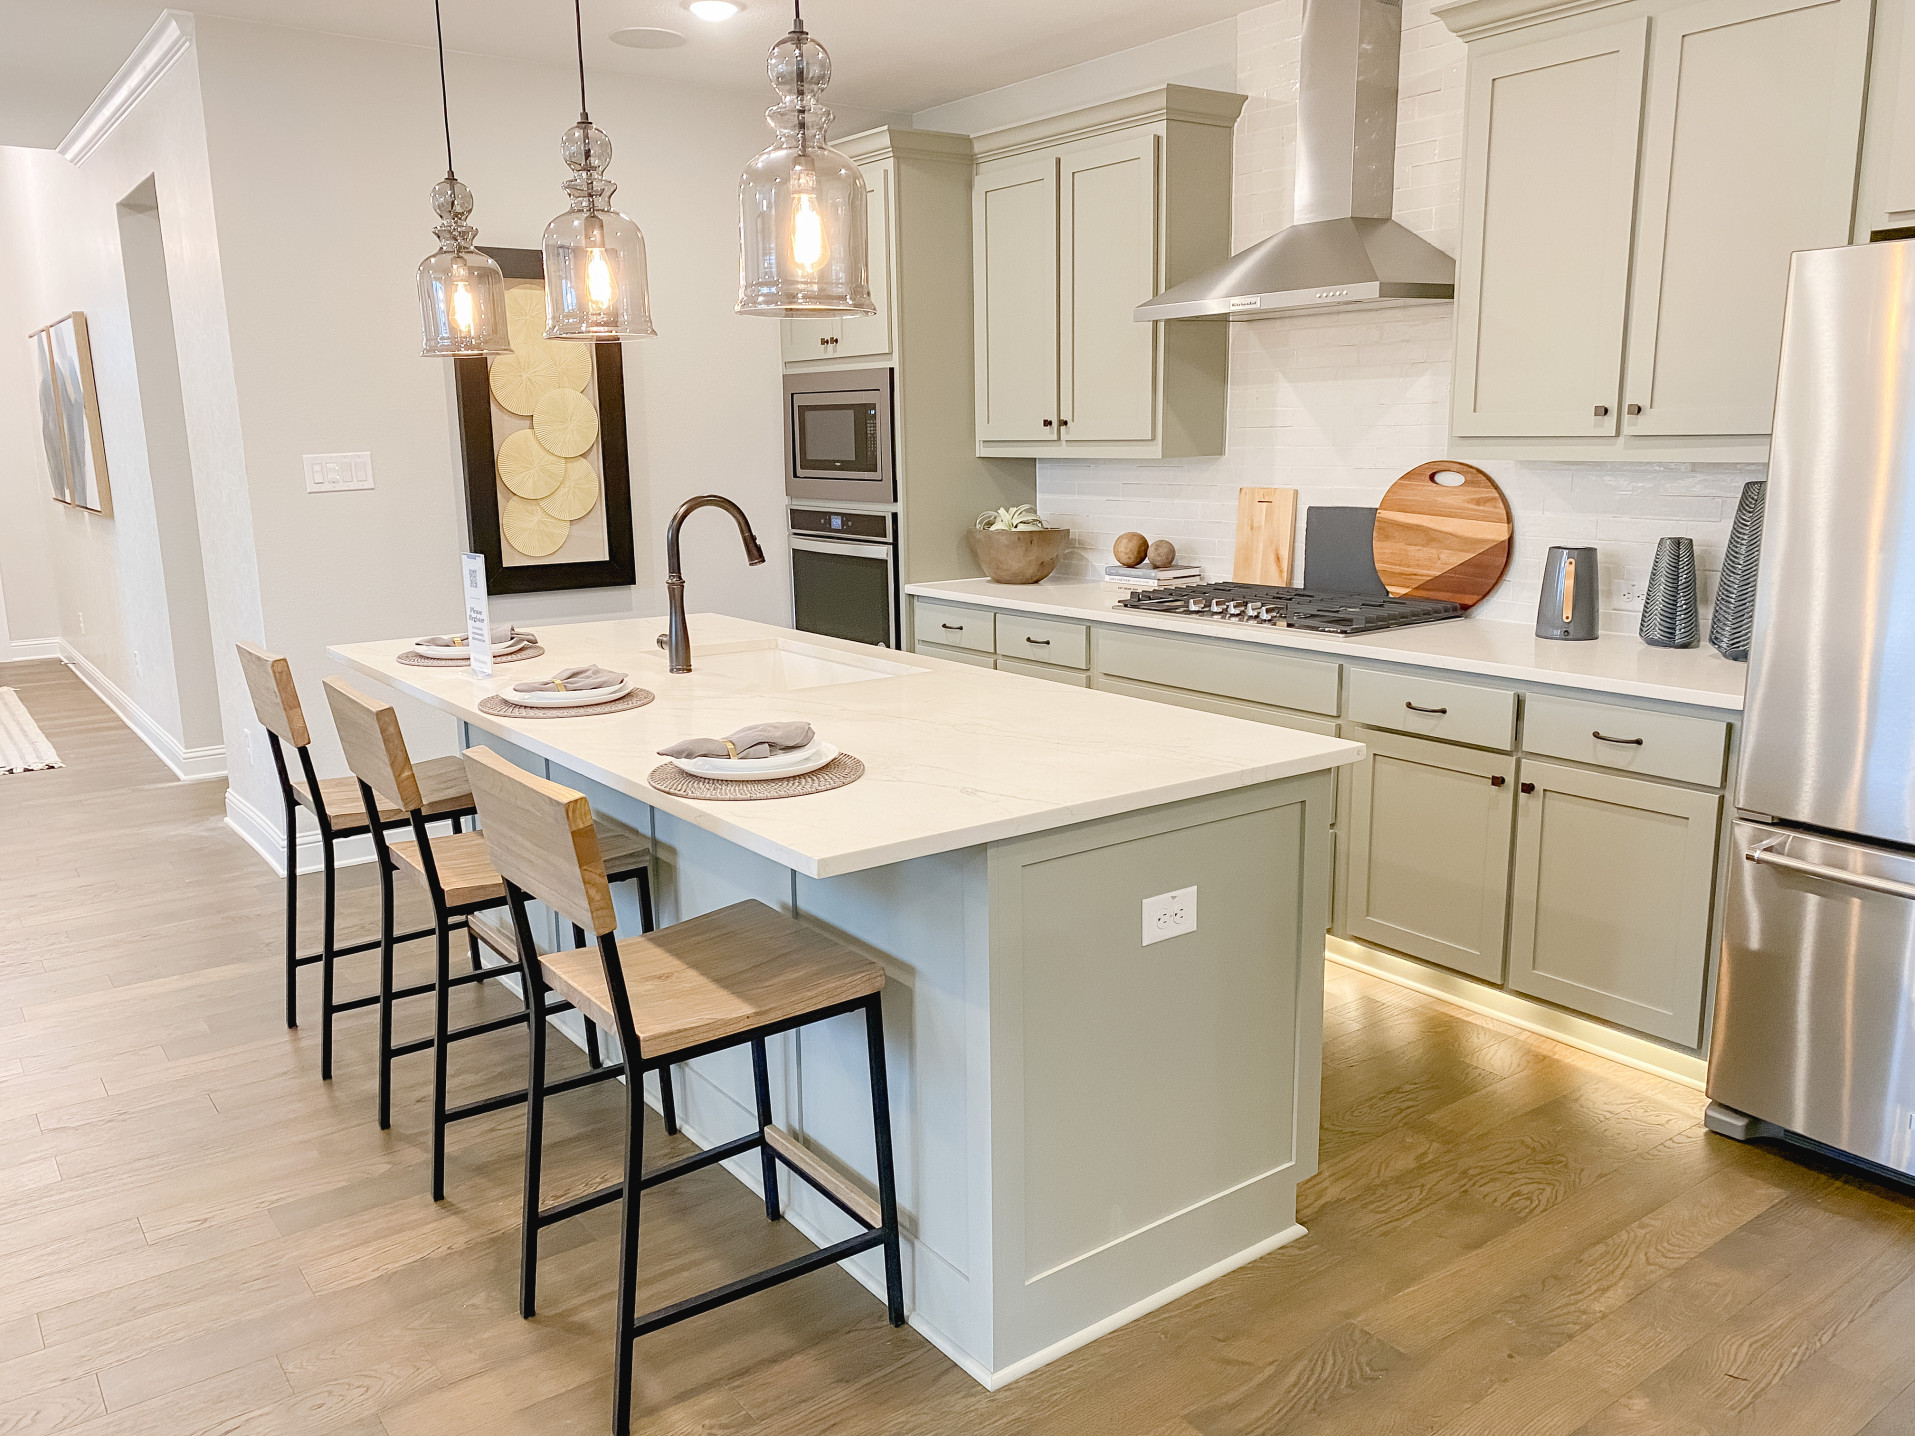 2. 10 Reasons Why Shopping for Kitchen Cabinets Online is Better Than In-Store